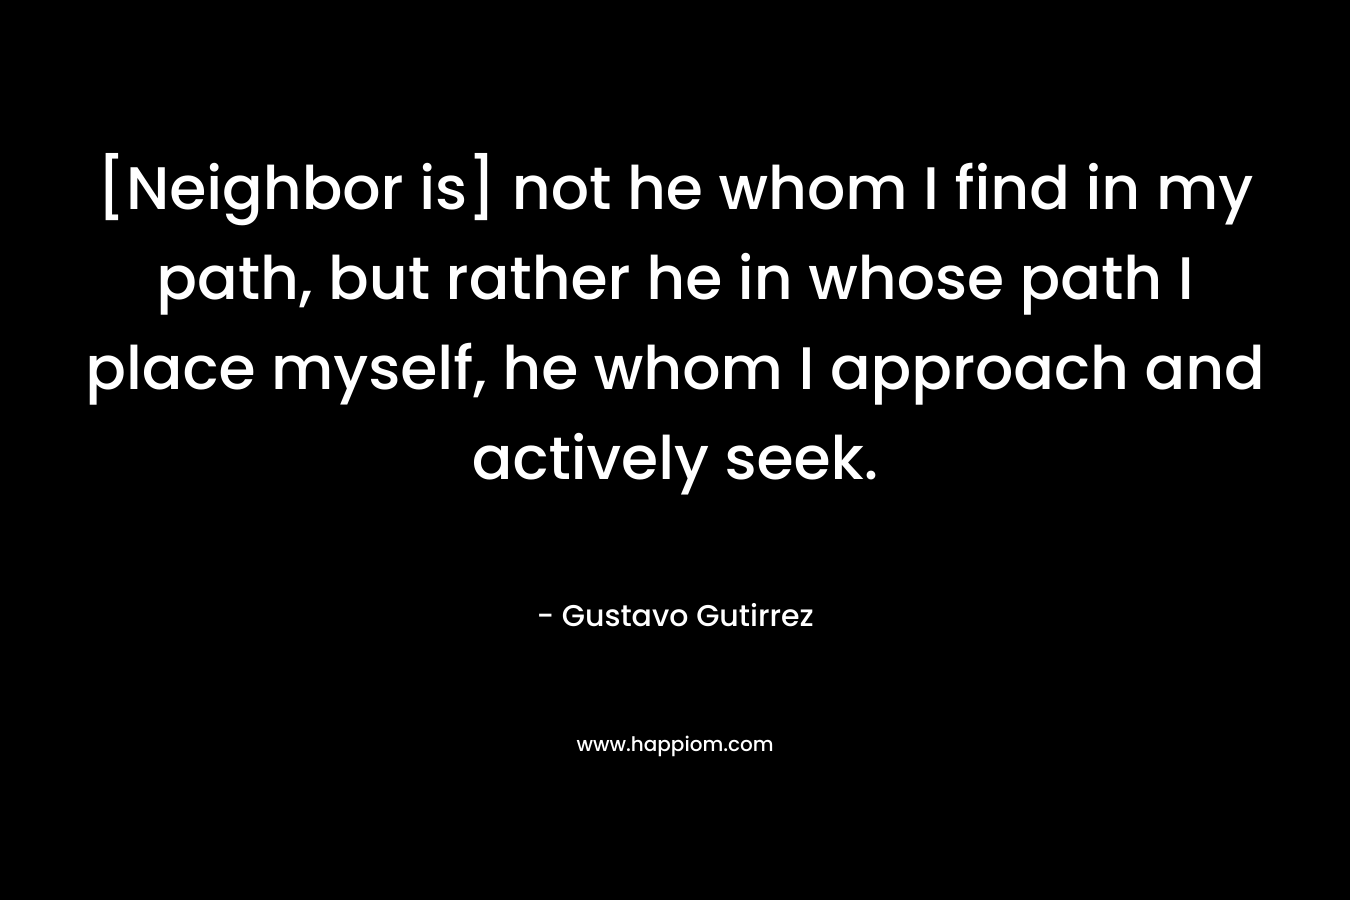 [Neighbor is] not he whom I find in my path, but rather he in whose path I place myself, he whom I approach and actively seek. – Gustavo Gutirrez